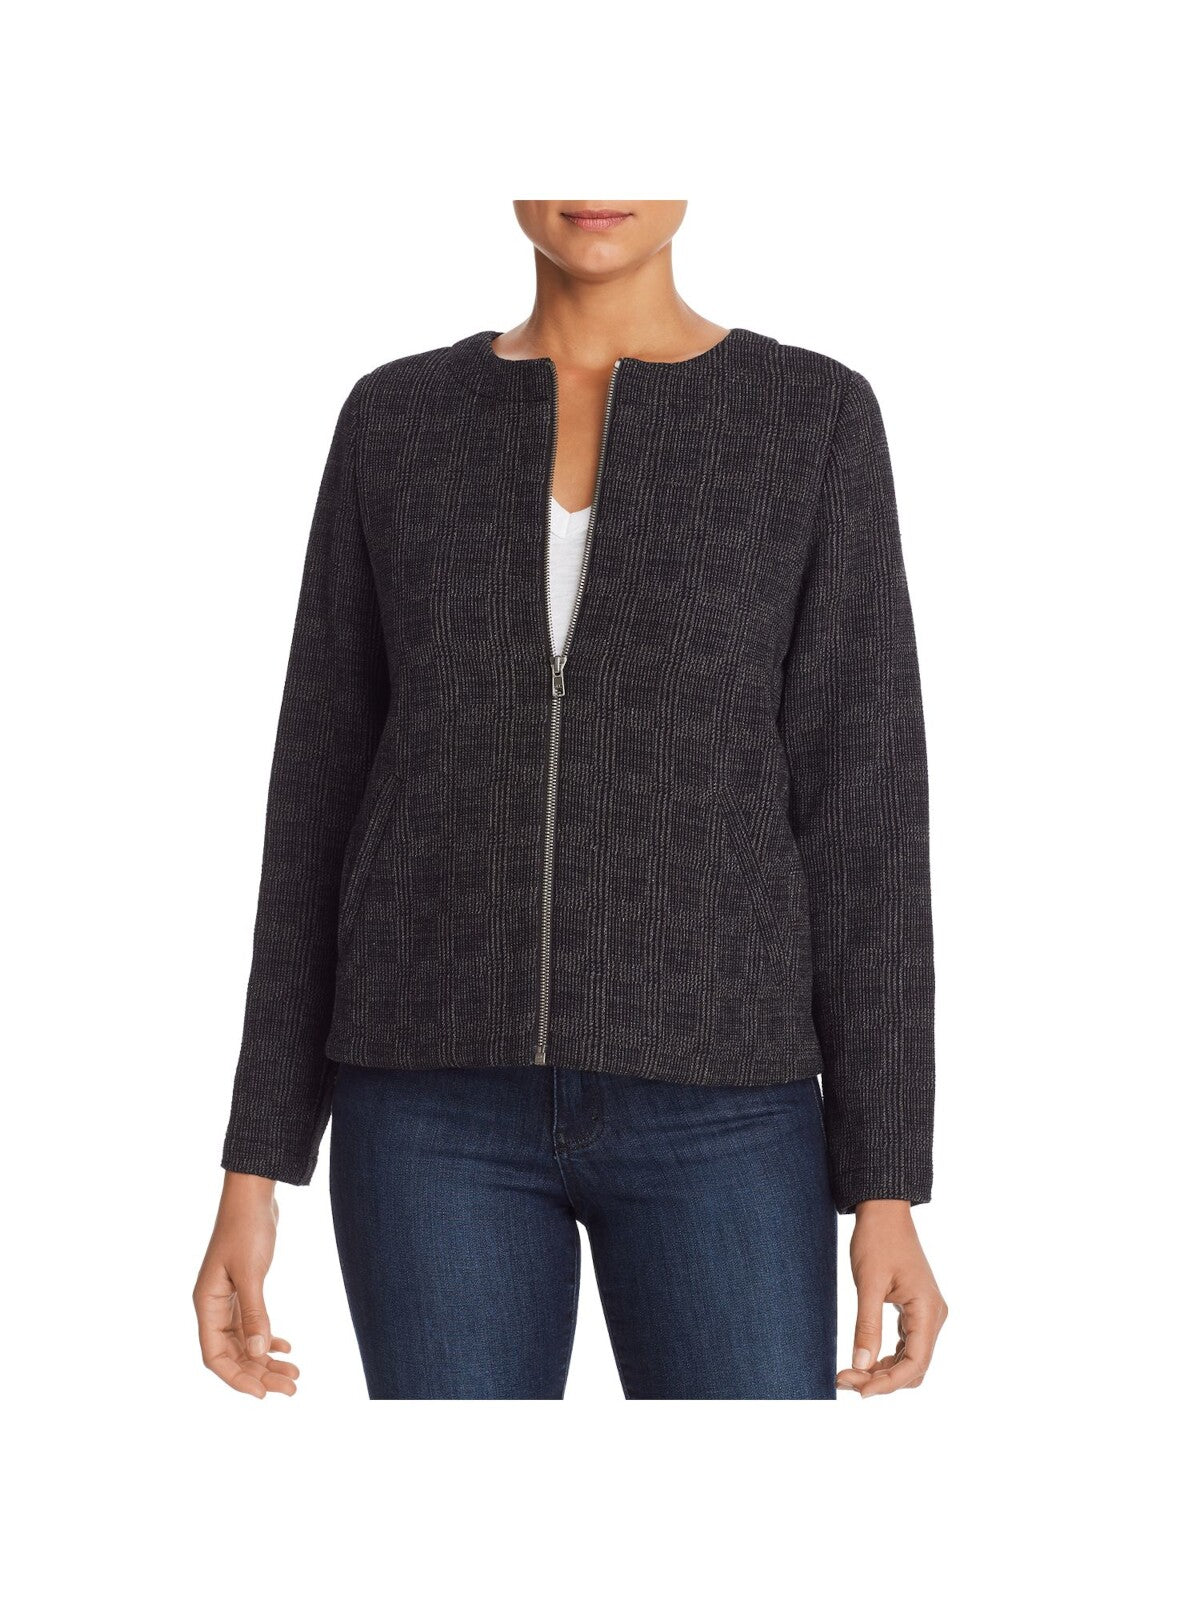 EILEEN FISHER Womens Gray Pocketed Textured Jacquard Zip Up Jacket M